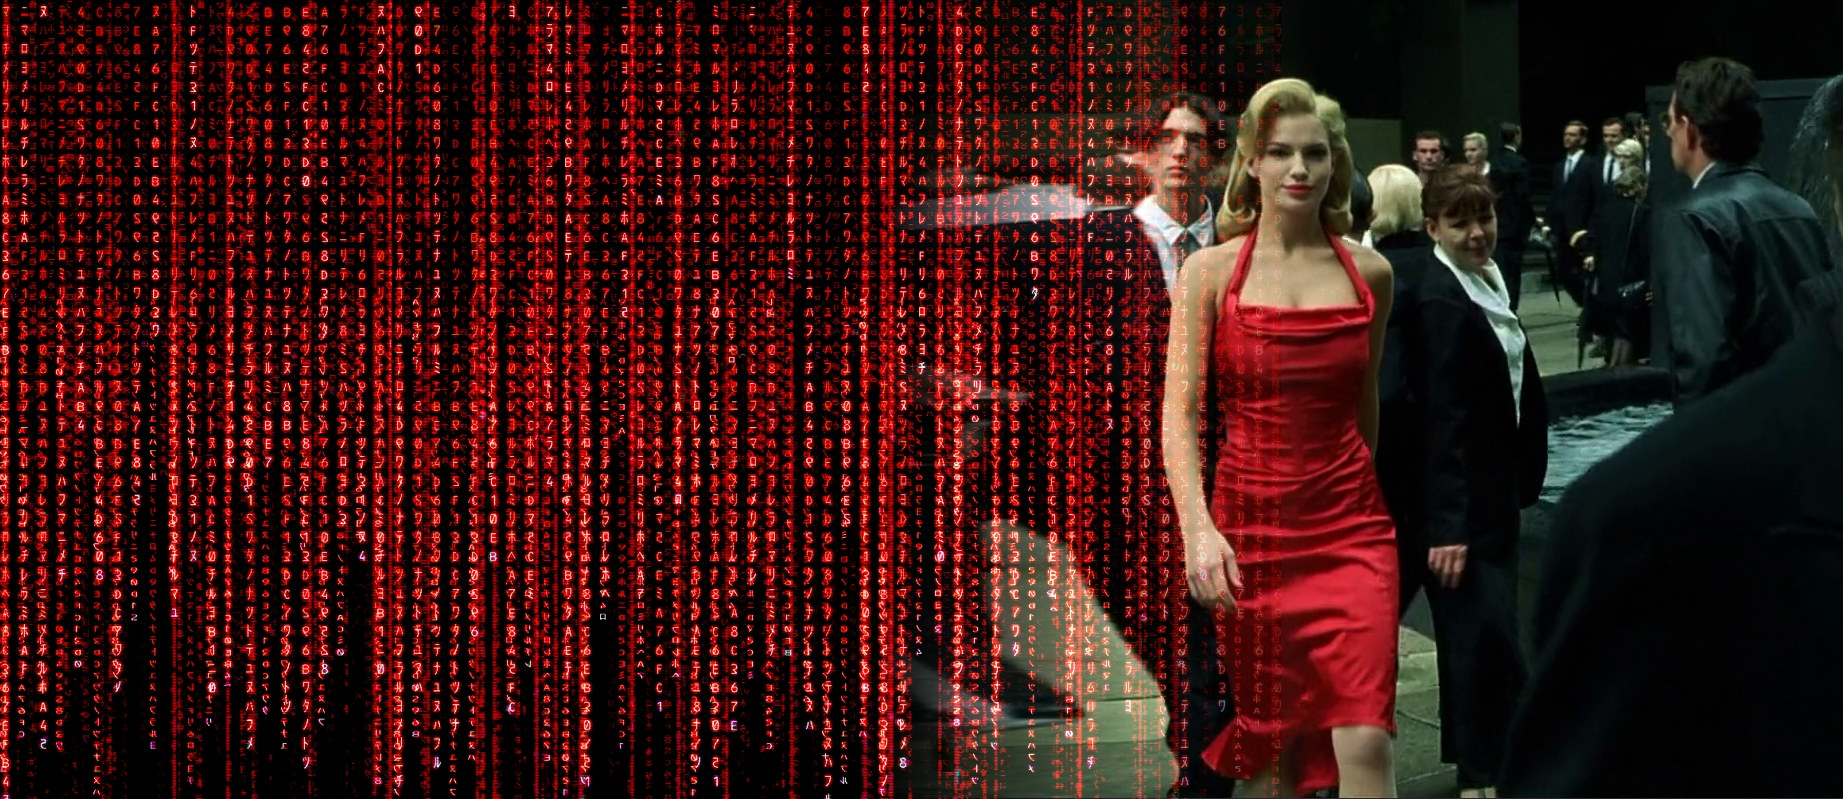 Matrix Exposed — In The Beginning There Was CODE